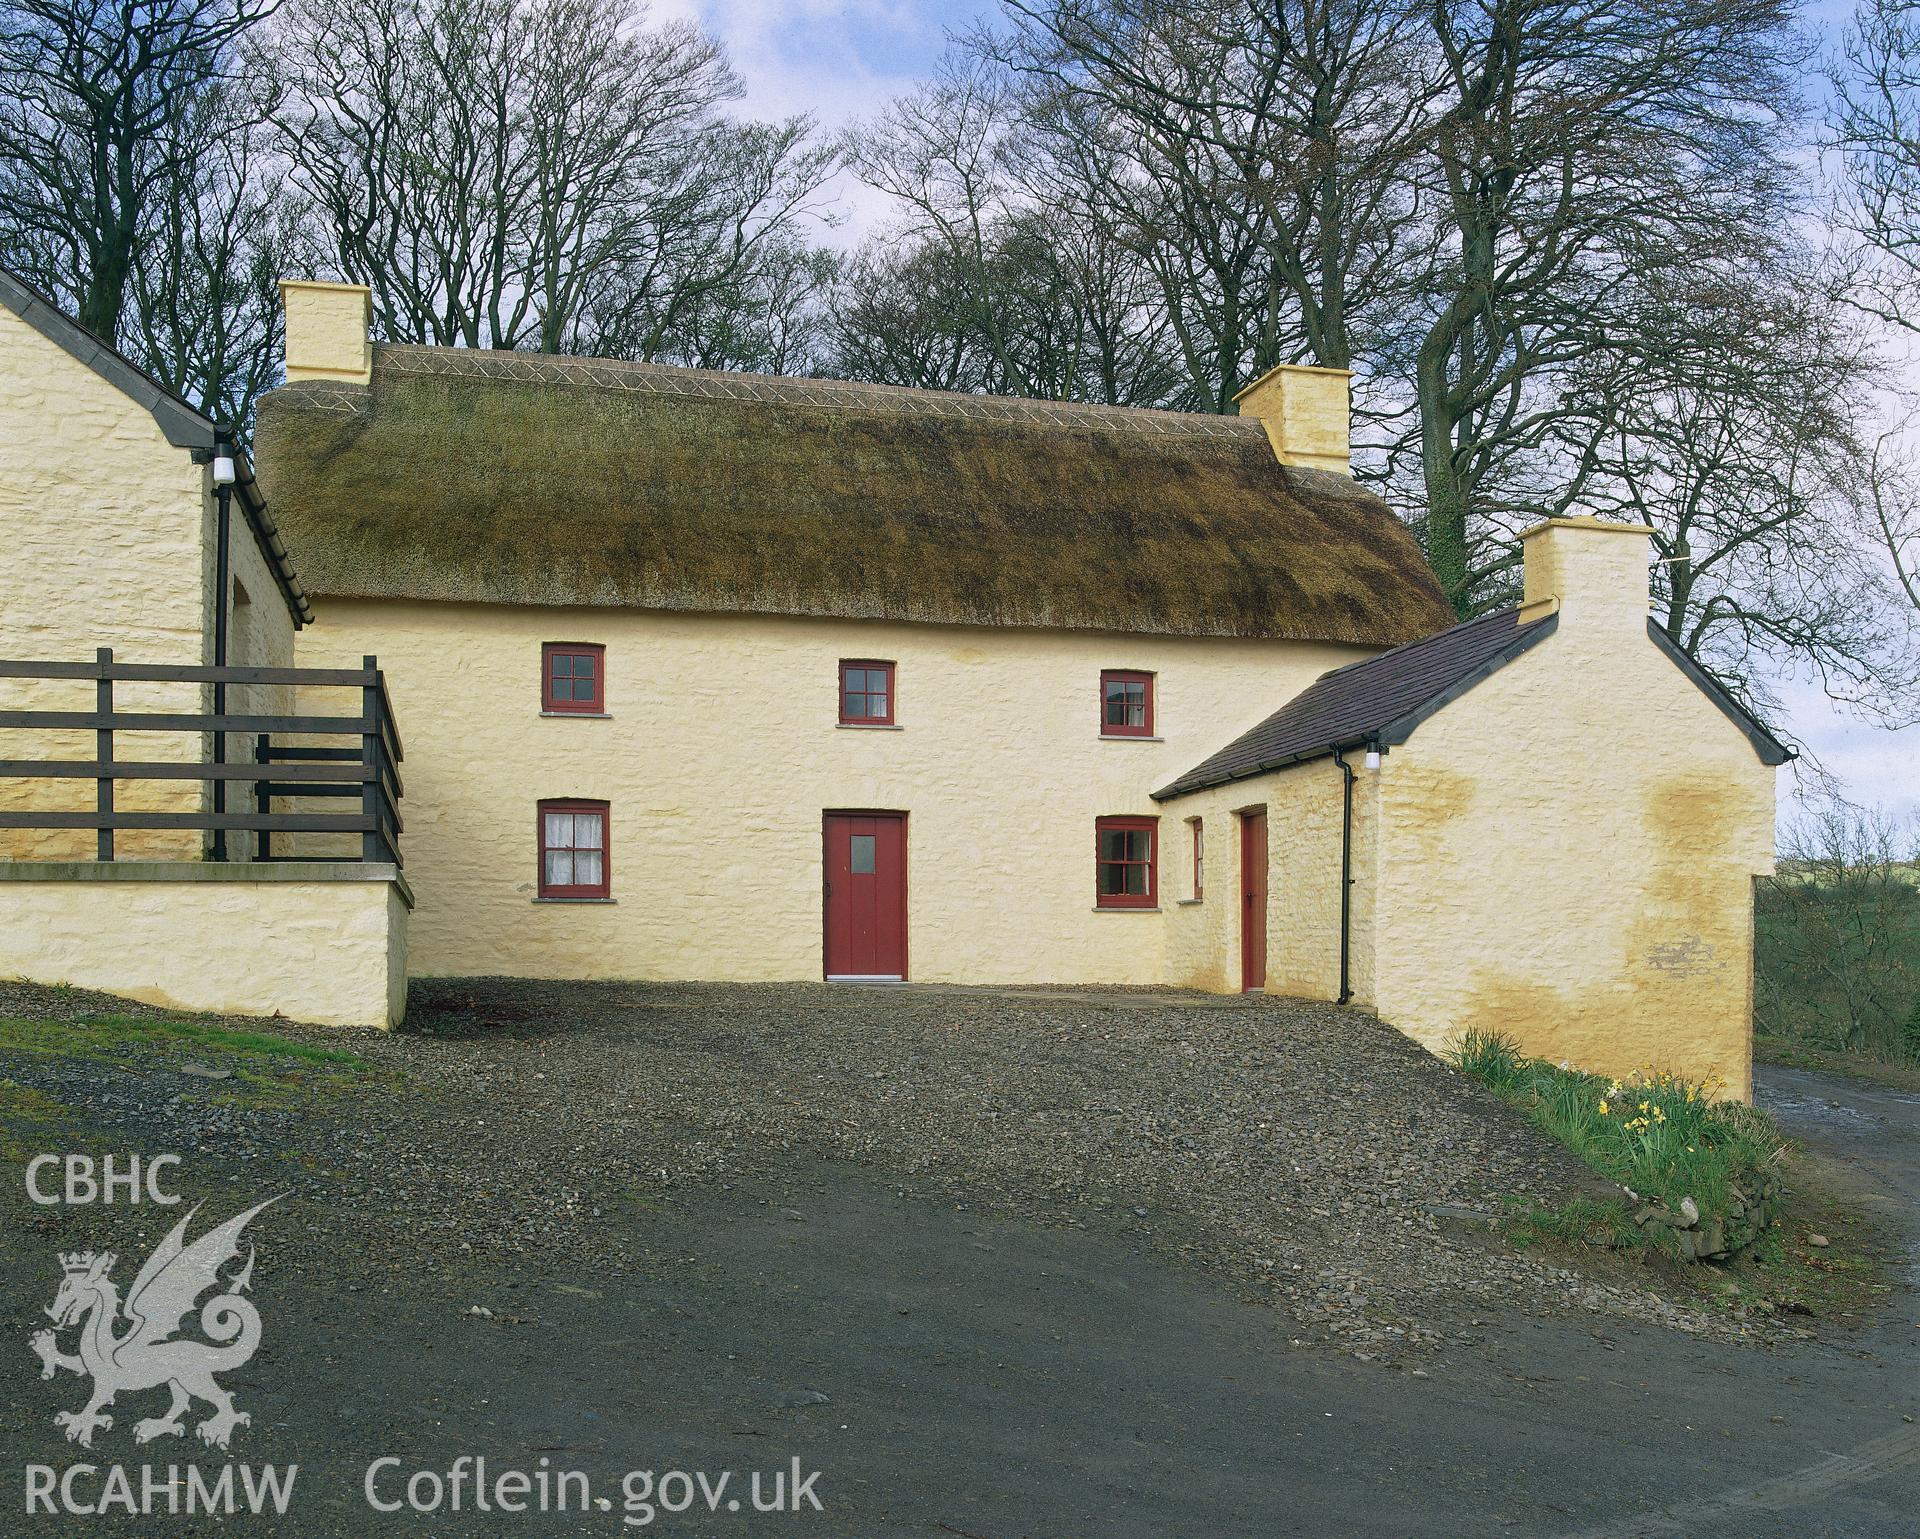 RCAHMW colour transparency showing exterior view of Treberfedd, Dihewyd.